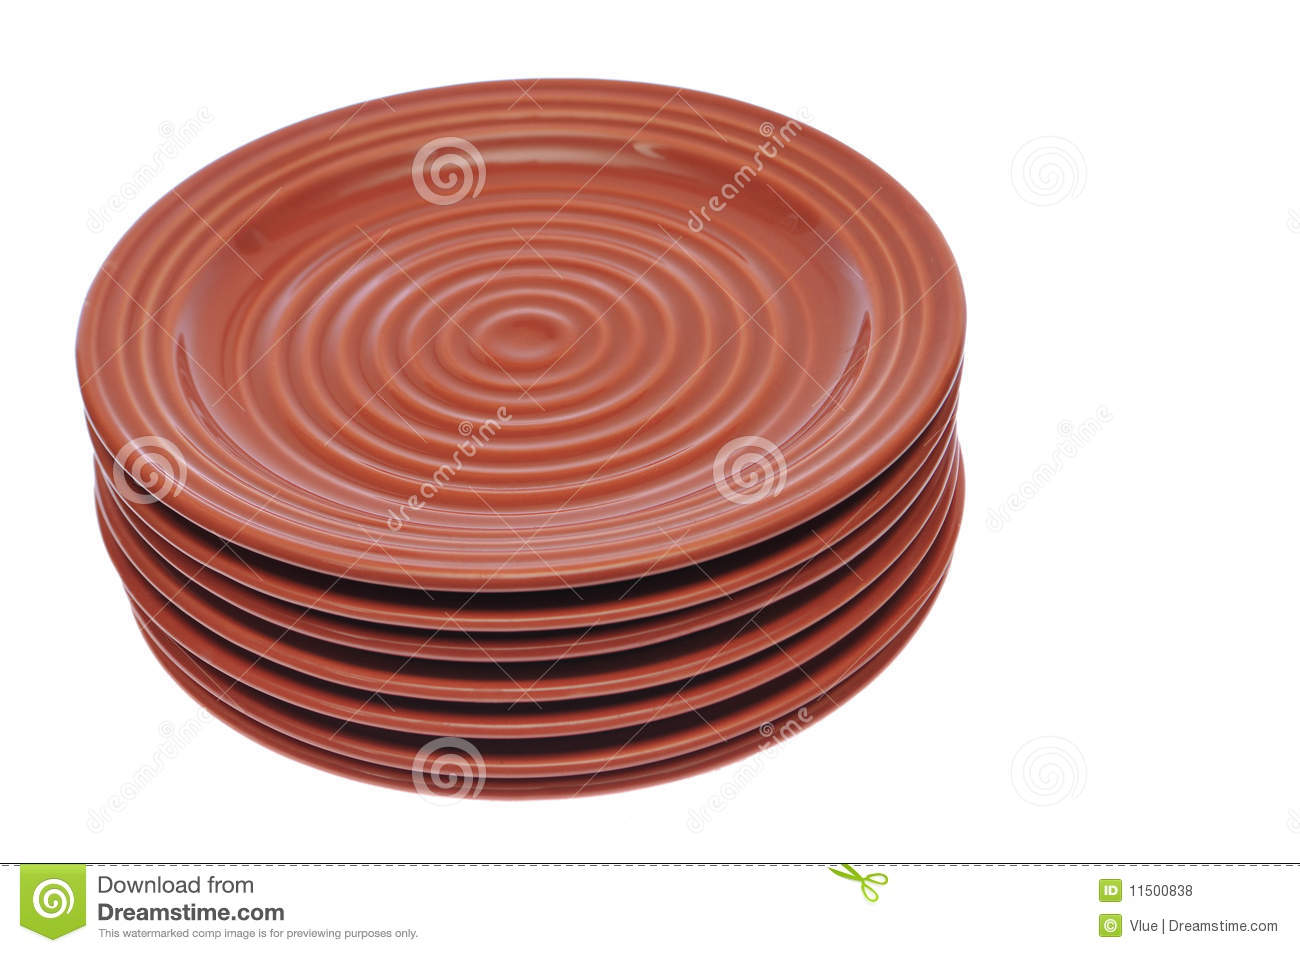 Stacked Red Brown Plates Royalty Free Stock Photos   Image  11500838